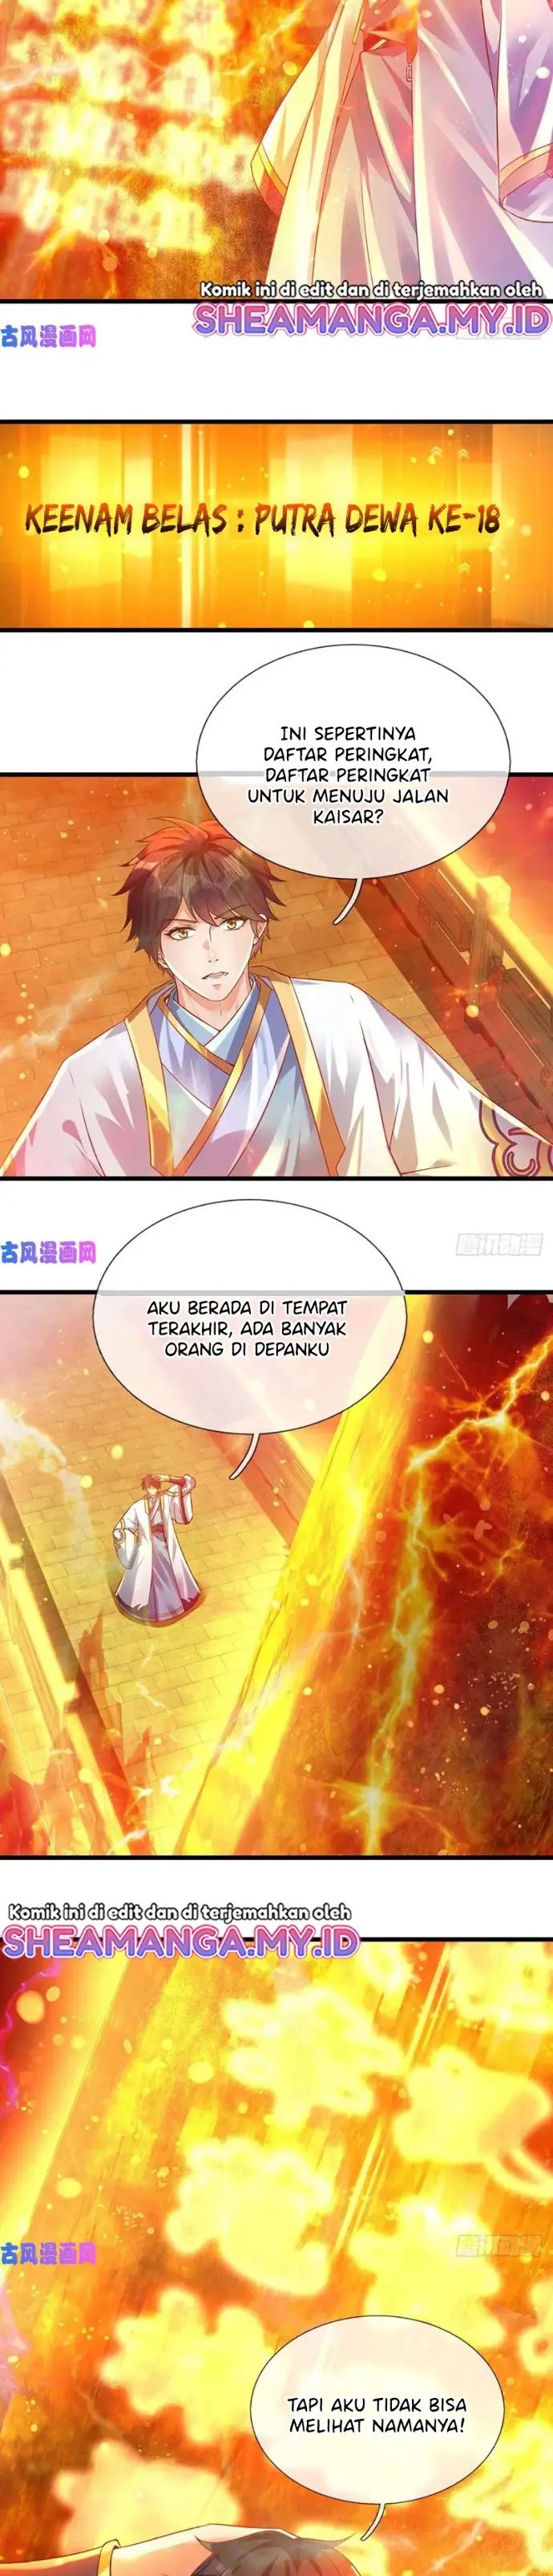 Star Sign In To Supreme Dantian Chapter 73